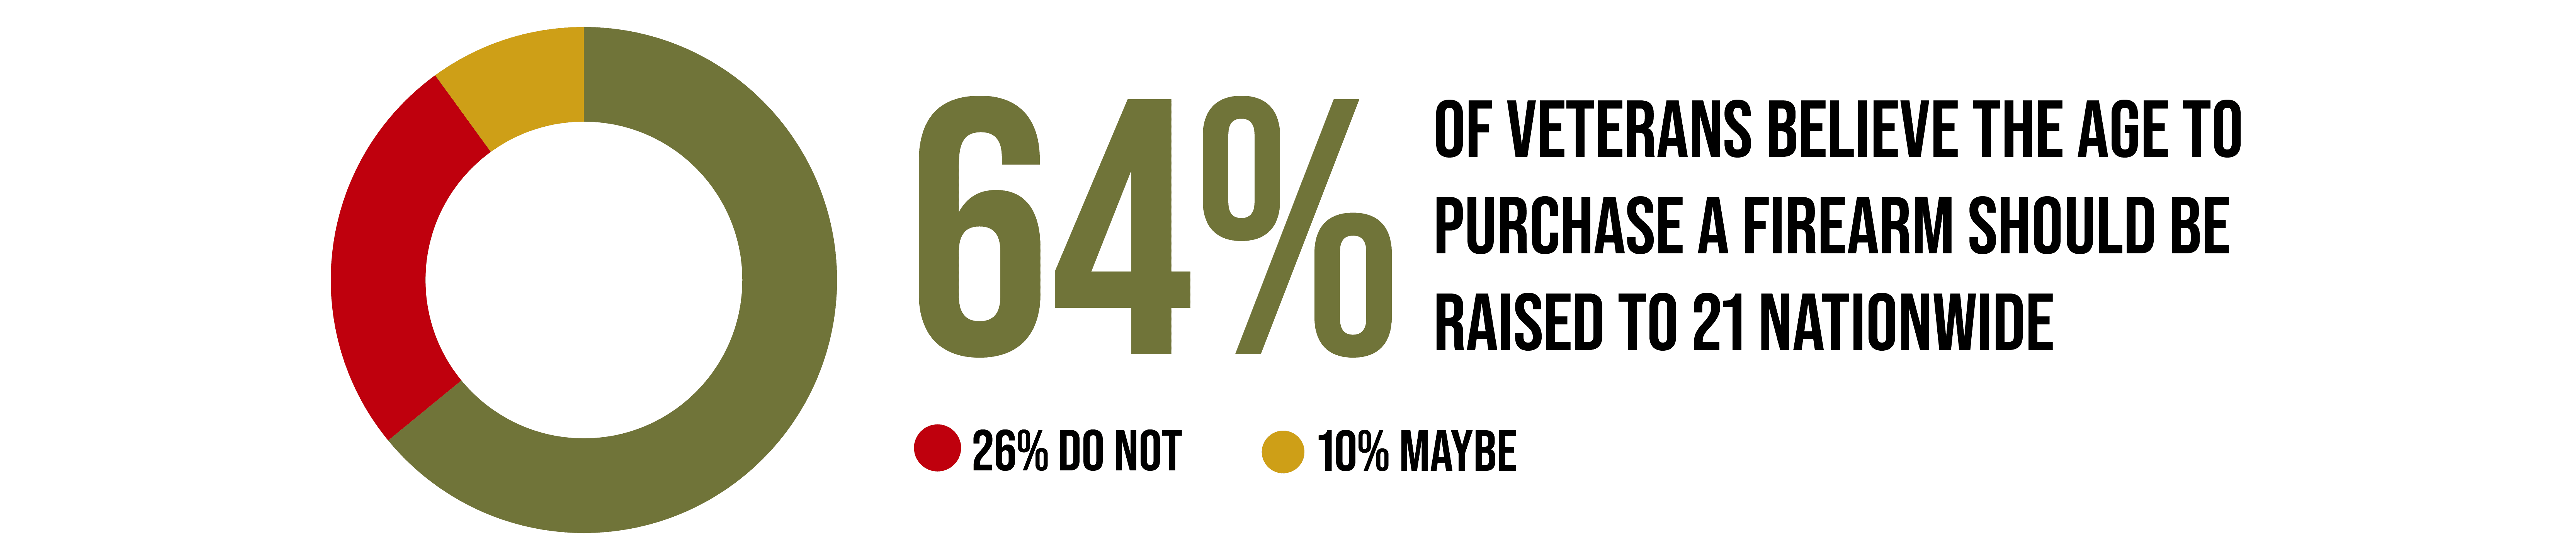 64% of Veterans Support Raising the Legal Age to Purchase a Gun to 21